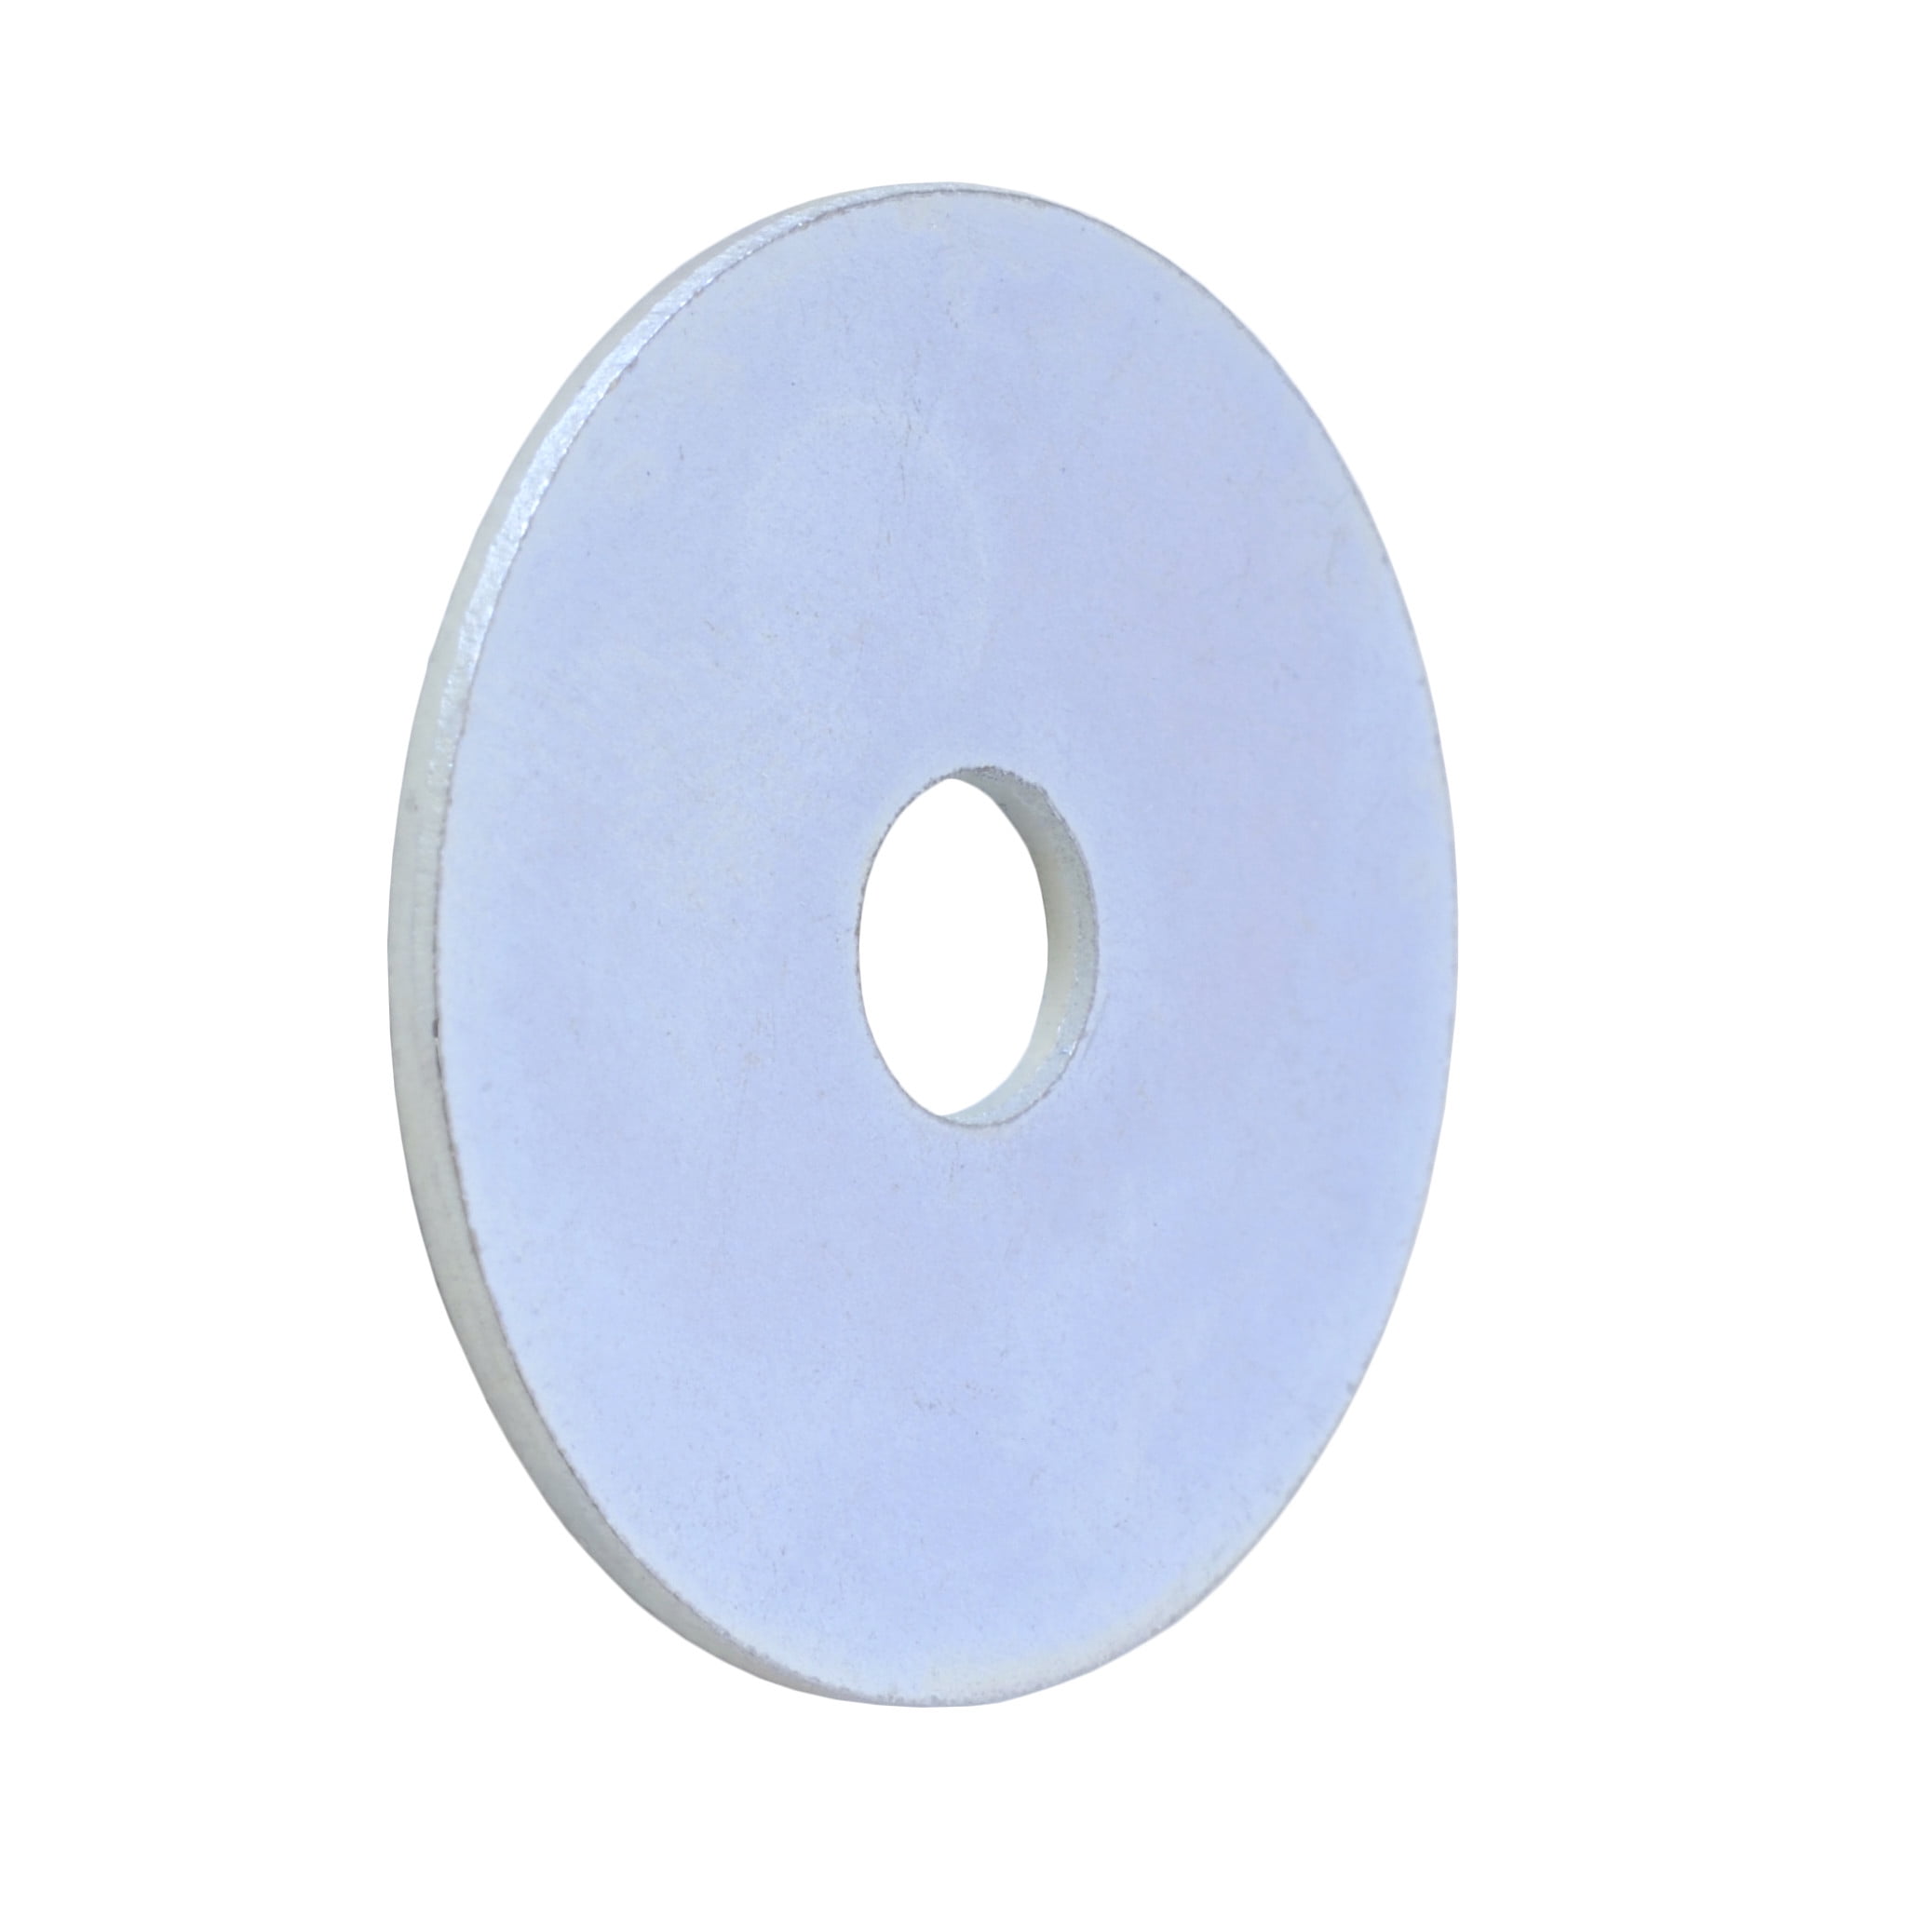 3/8X1-1/2 Fender Washers Stainless Steel 3/8" x 1-1/2" Large OD Washers 5 